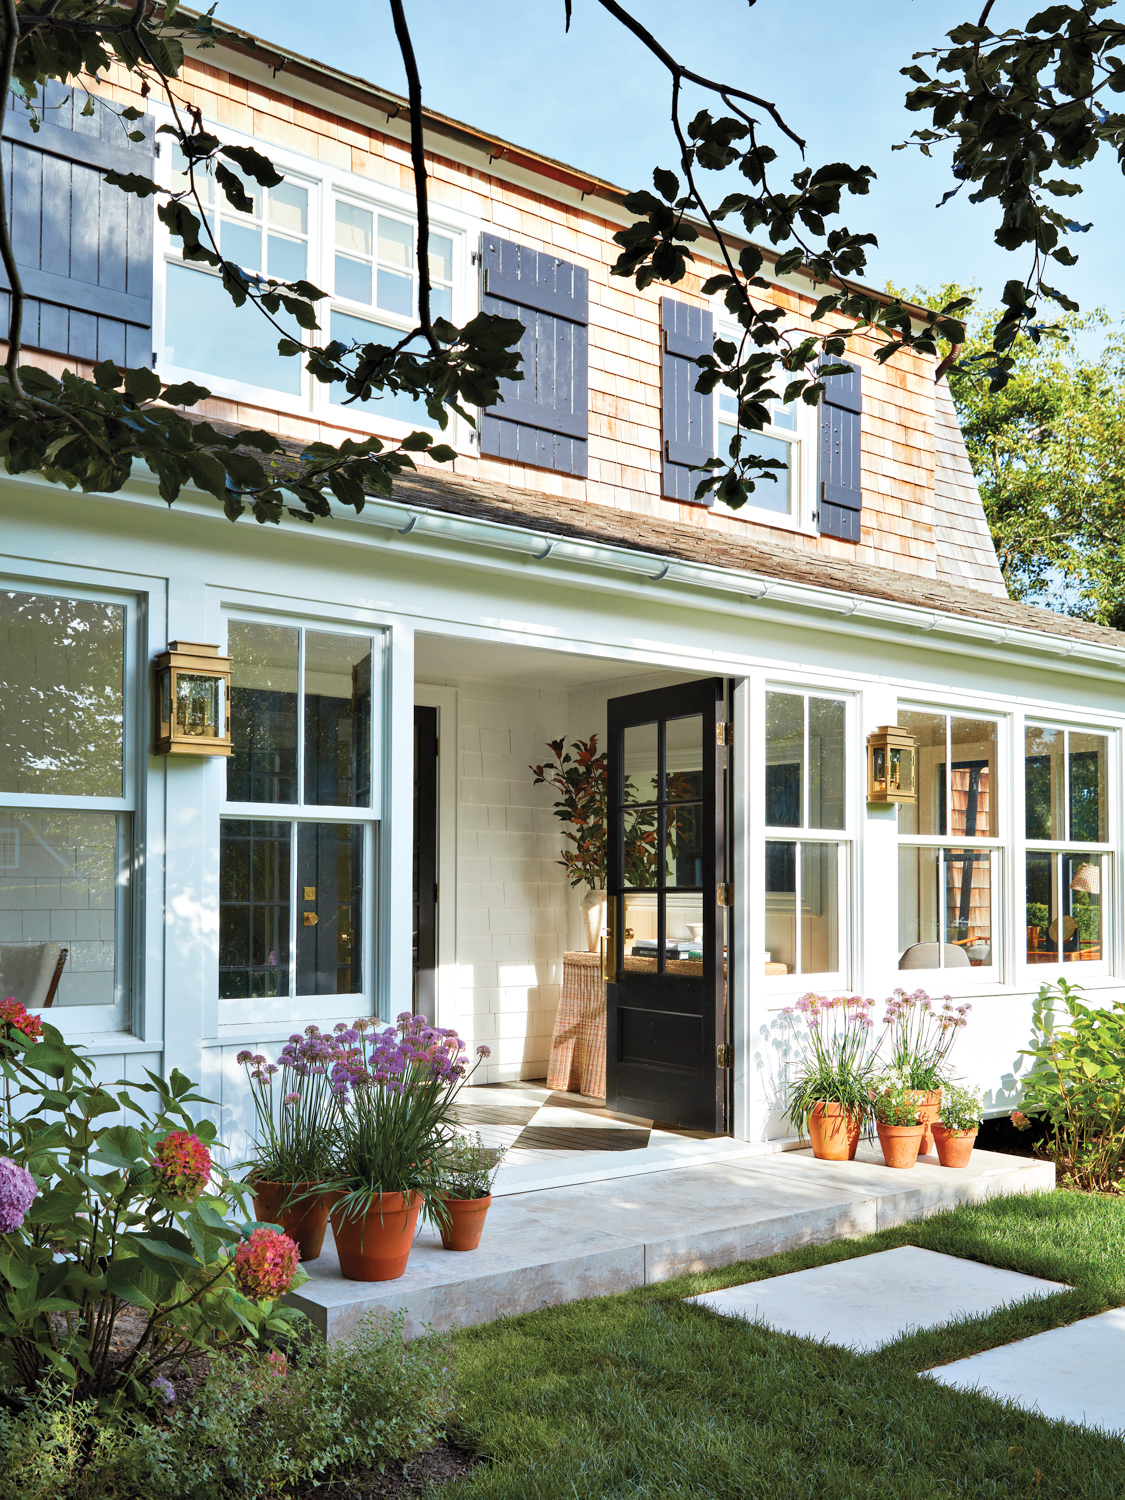 Midcentury Meets Cottagecore In This Cheery Hamptons Farmhouse